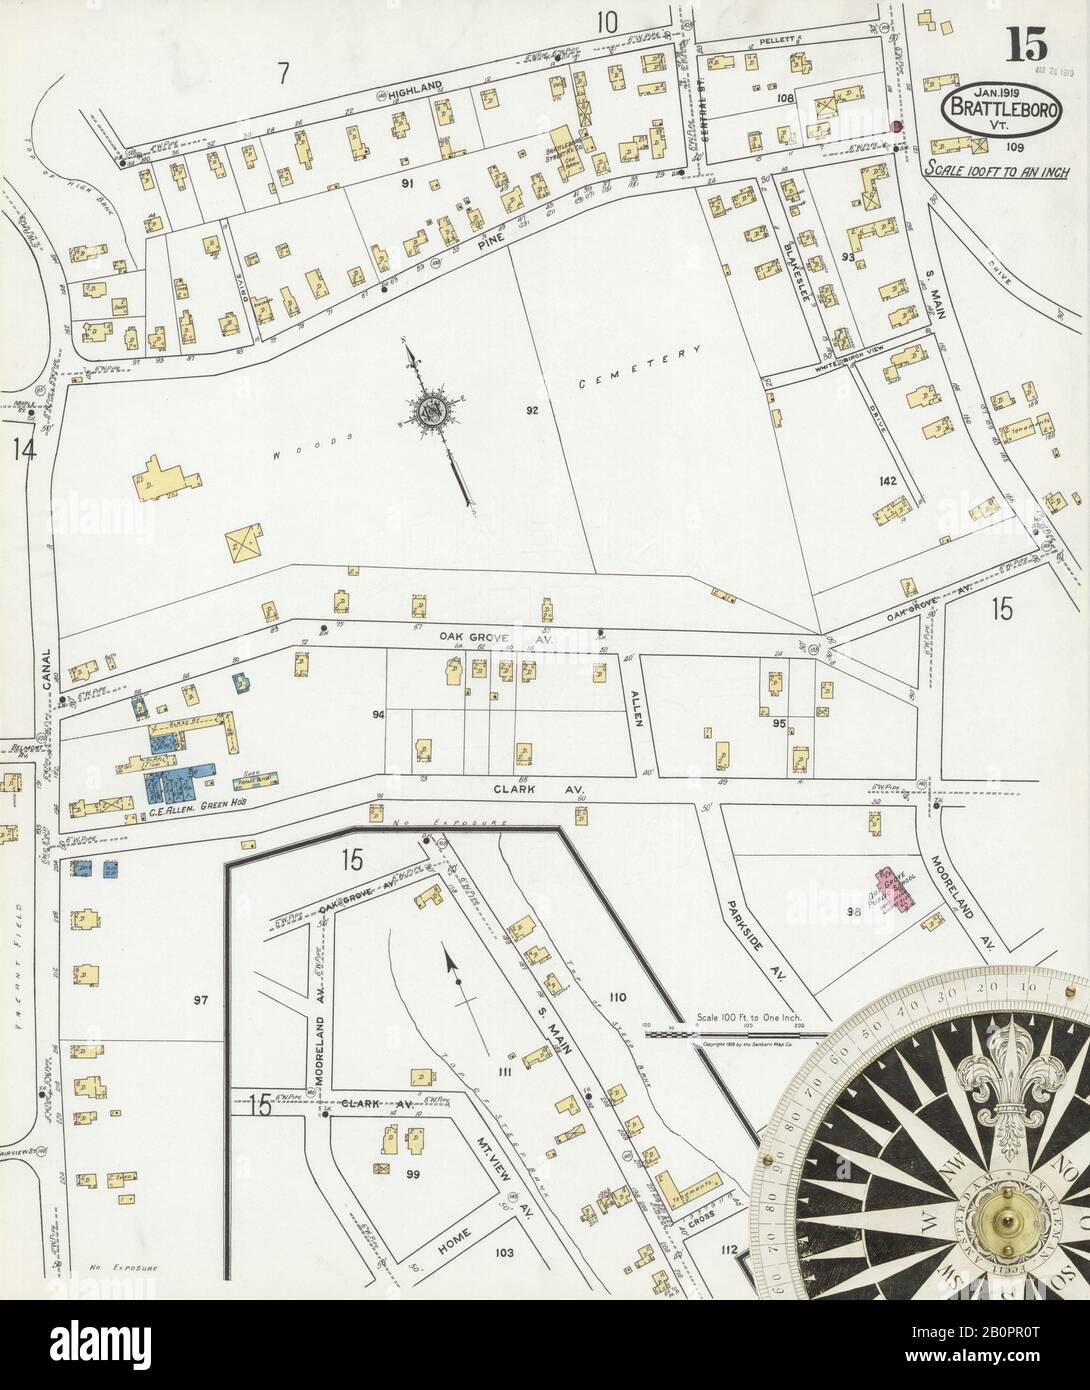 Image 15 of Sanborn Fire Insurance Map from Brattleboro, Windham County, Vermont. Jan 1919. 19 Sheet(s), America, street map with a Nineteenth Century compass Stock Photo